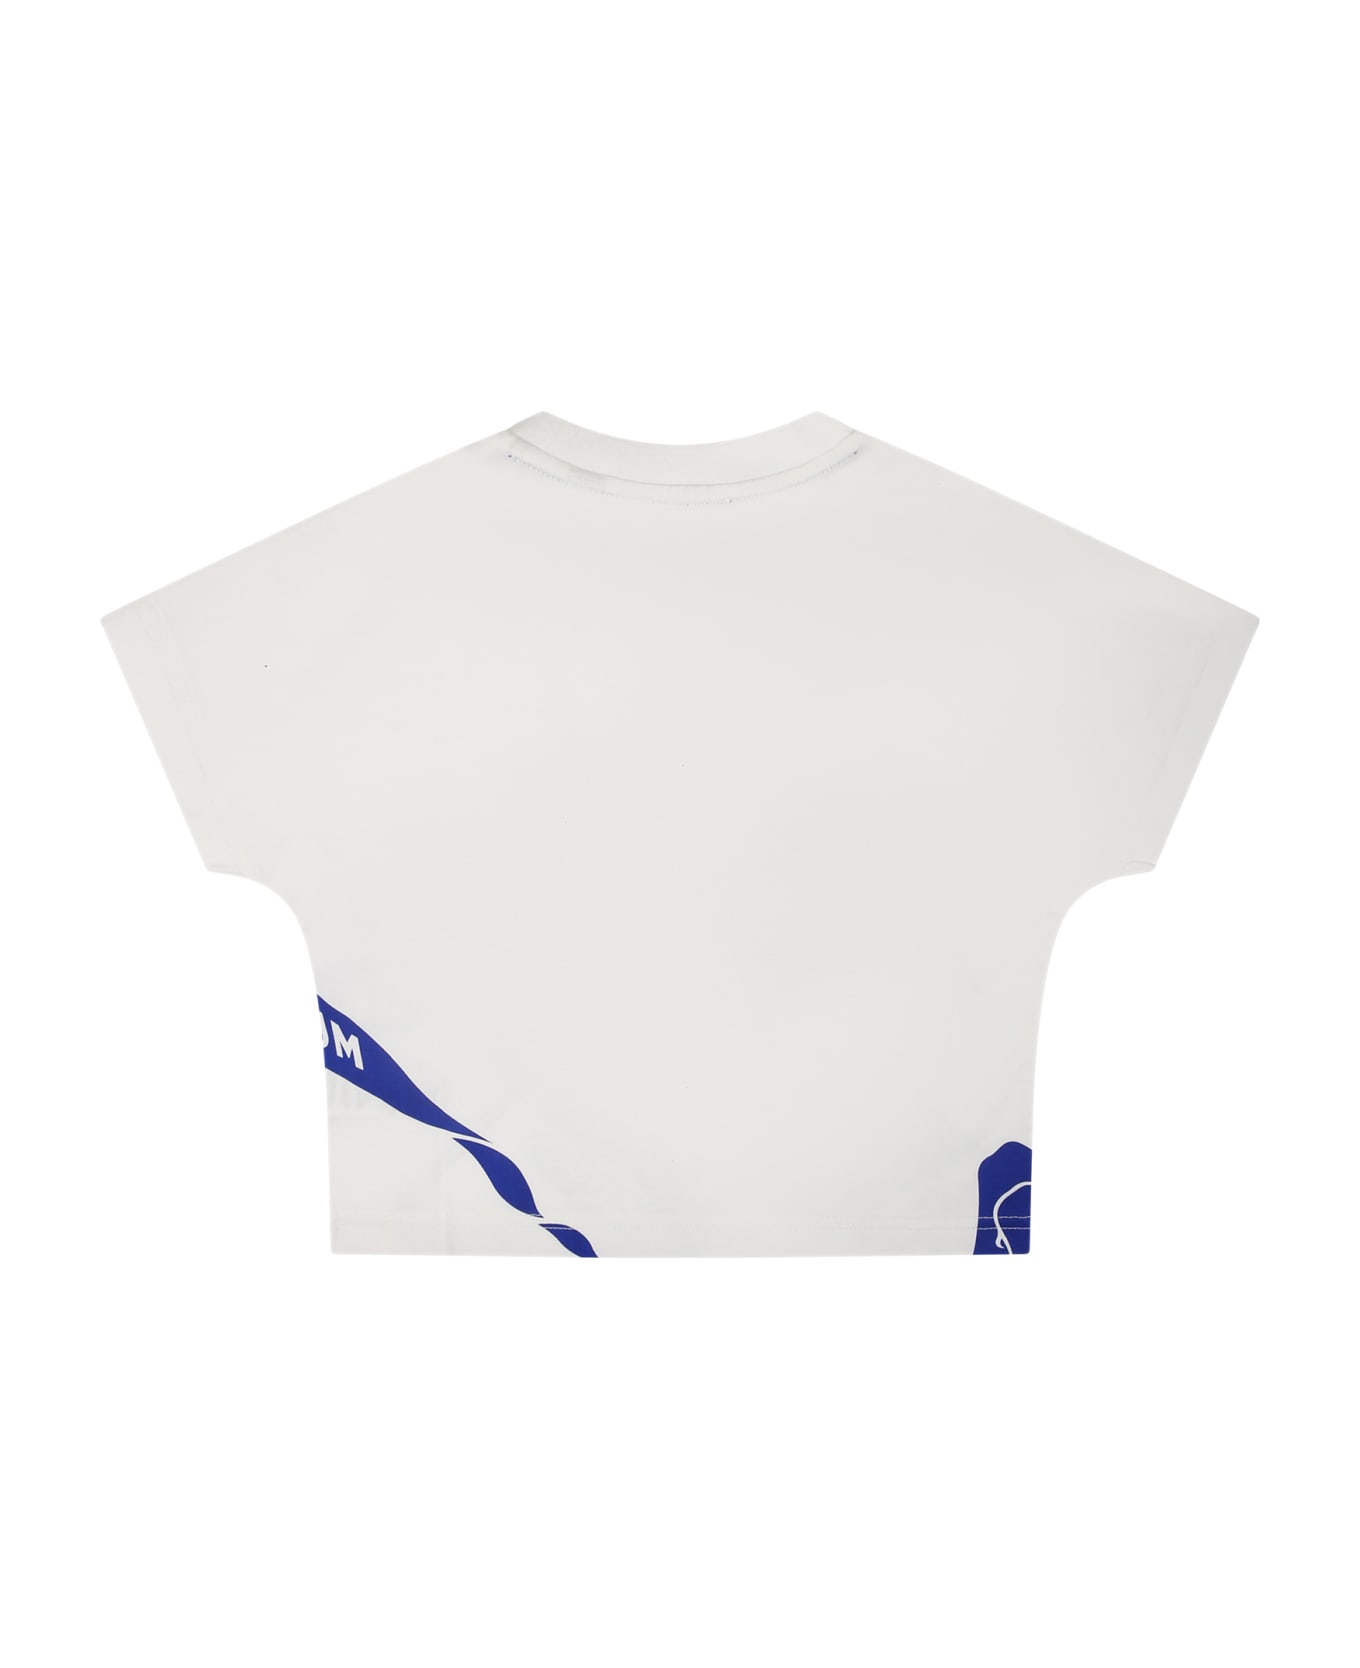 Burberry White T-shirt For Baby Girl With Print - White